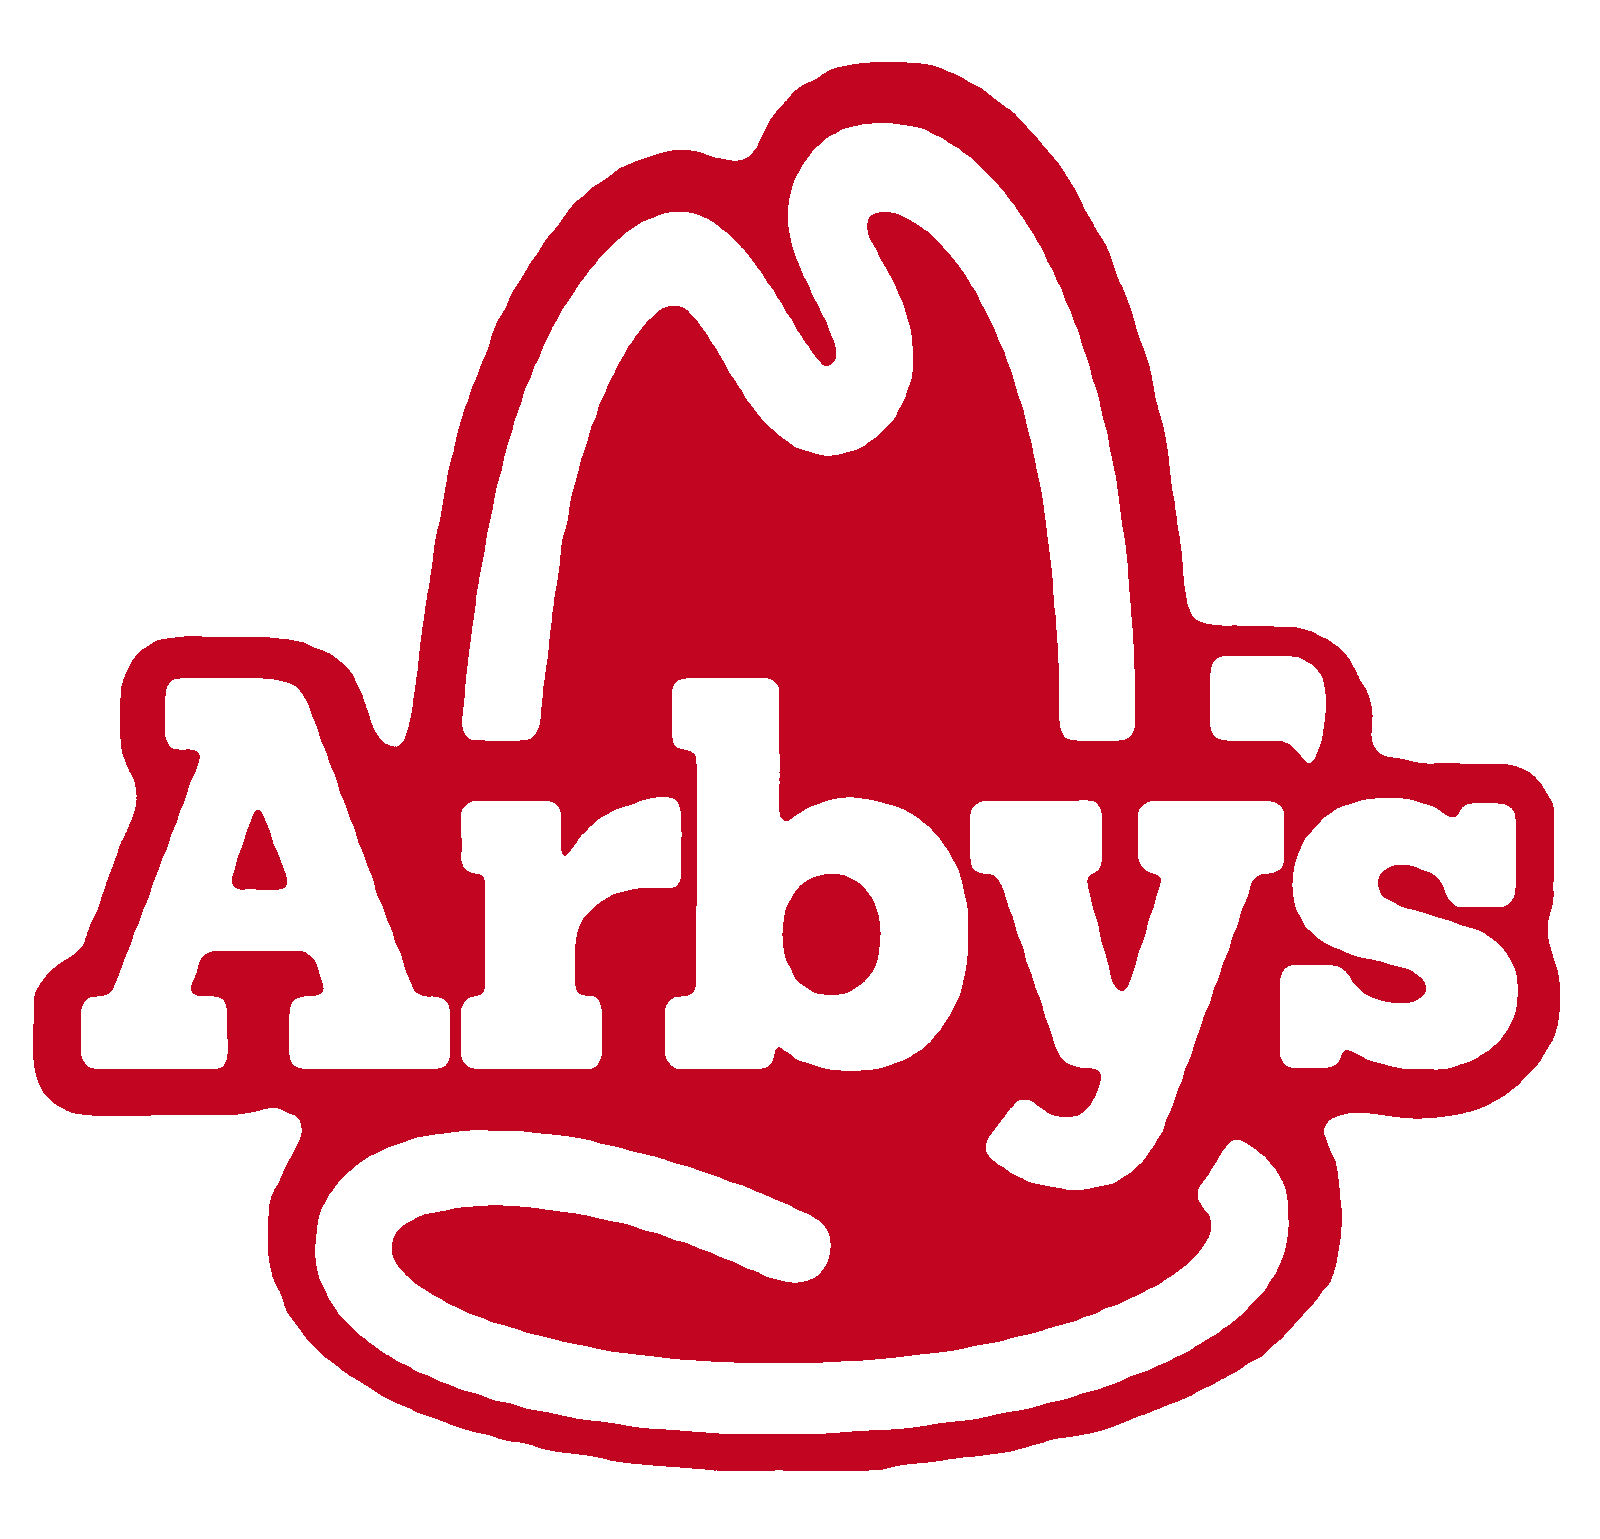 Image Arby's new logo 2013.png Logopedia, the logo and branding site